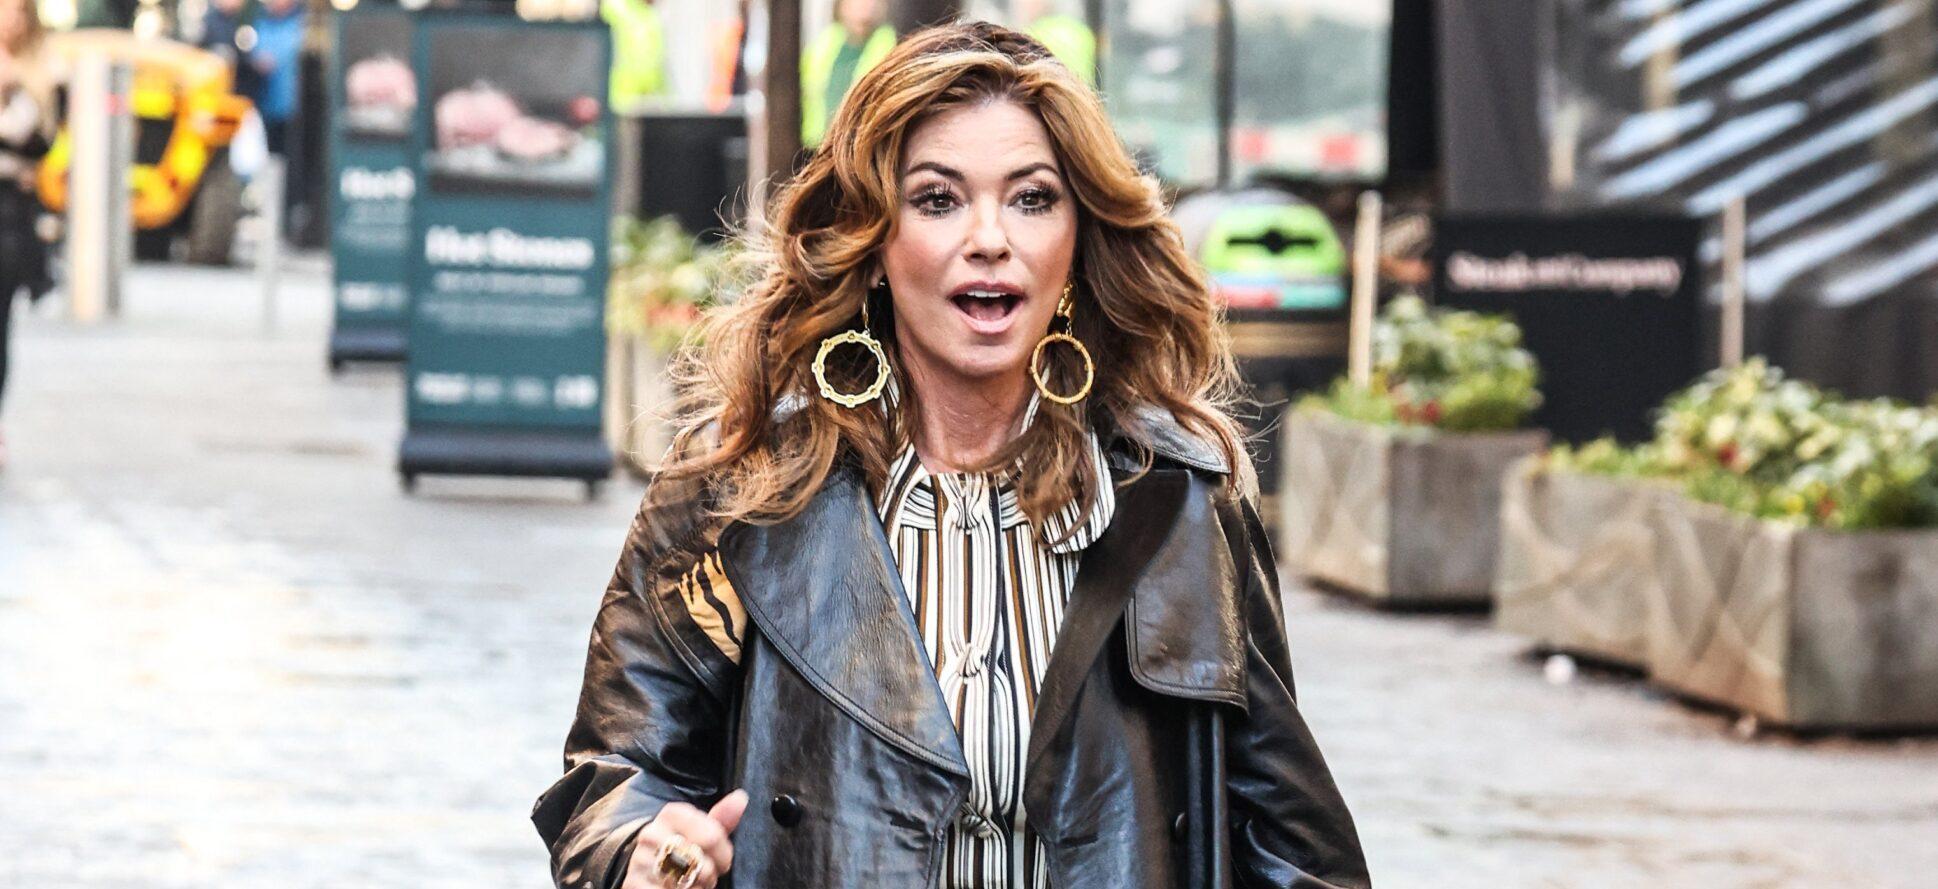 Shania Twain Believes She Will ‘Blend Beautifully’ With This Best-Selling Singer On A Collaboration